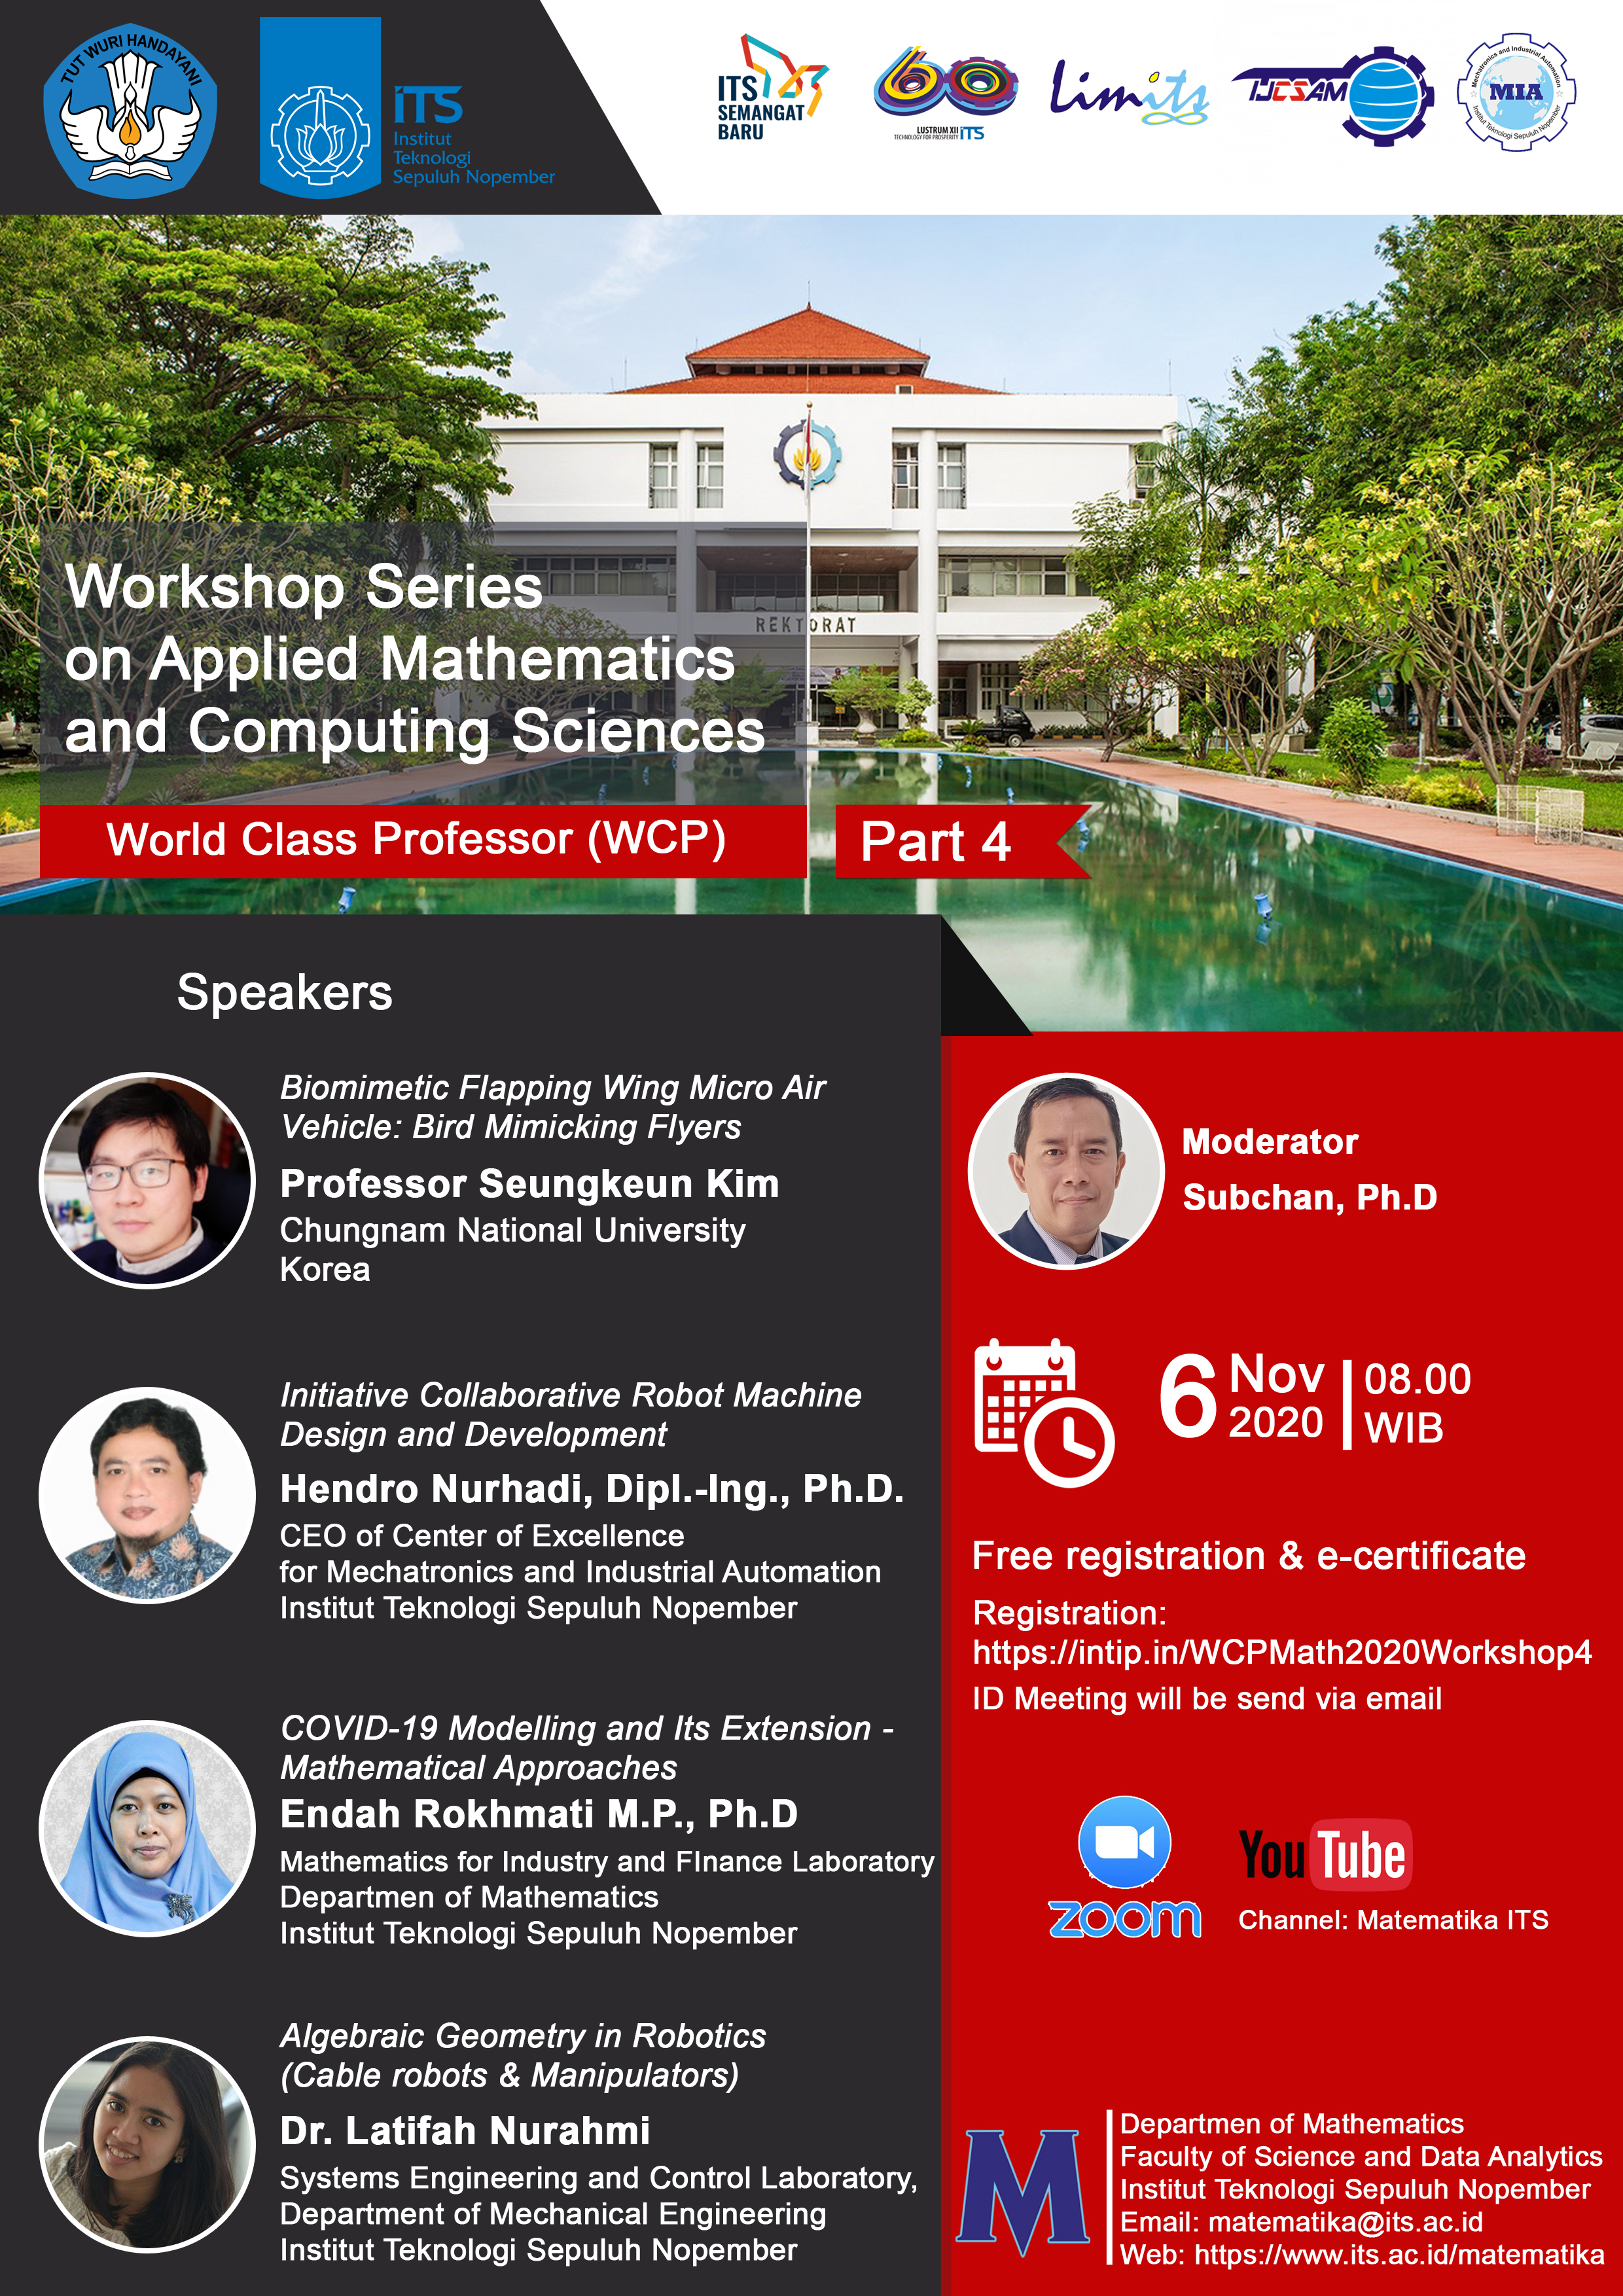 Workshop Series on Applied Mathematics and Computing Sciences